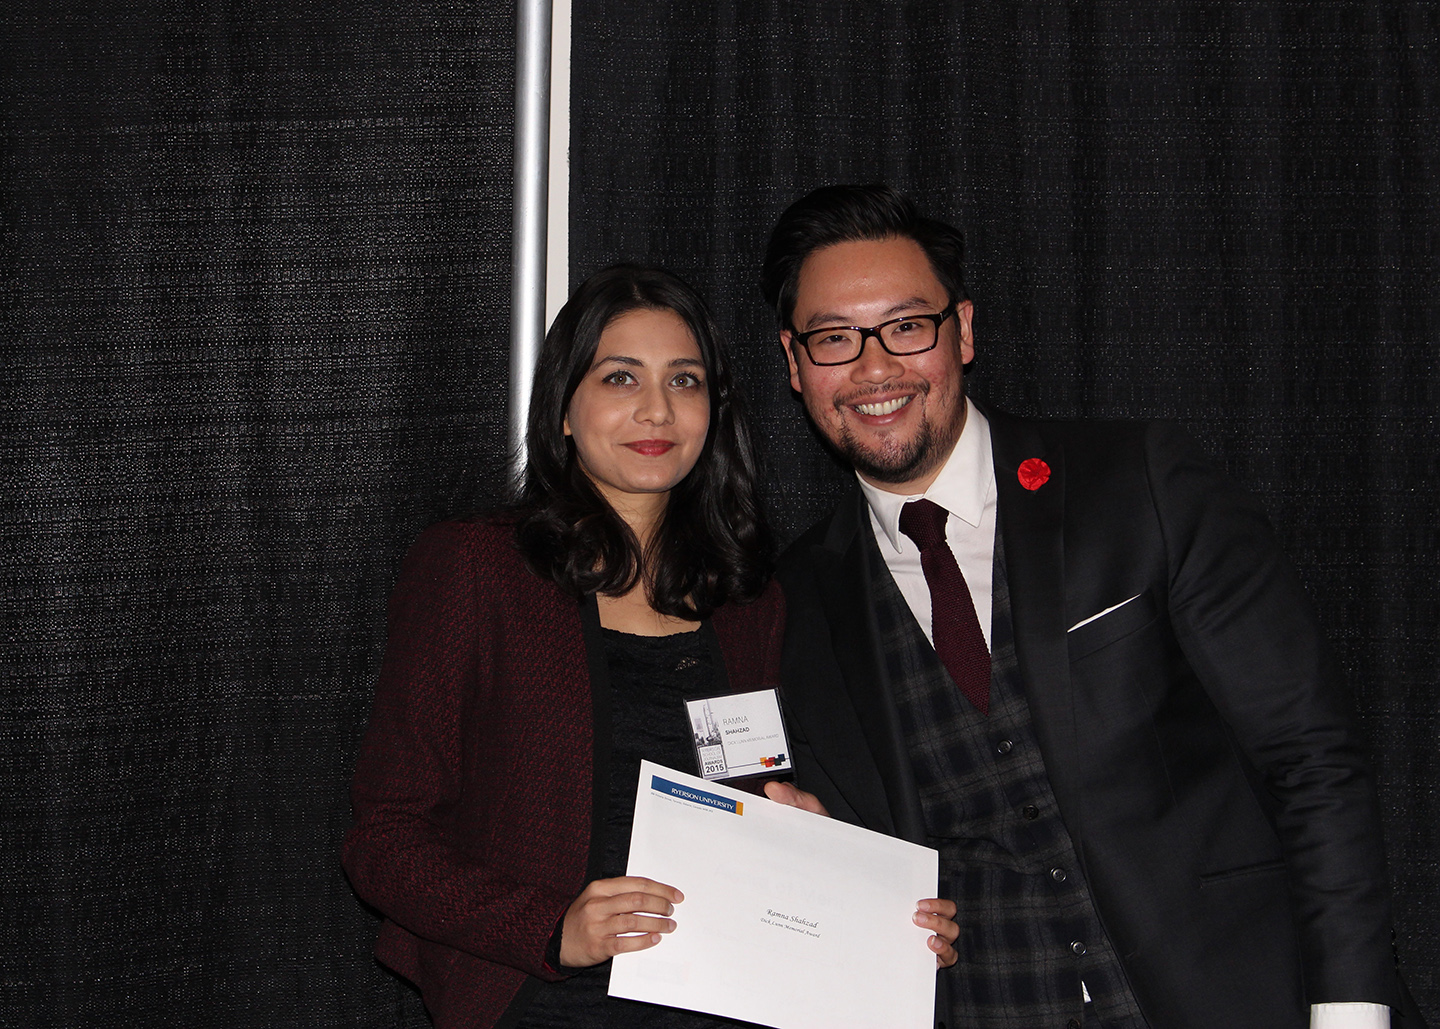 2015 winner Ramna Shahzad with Awards committee member Adrian Ma.